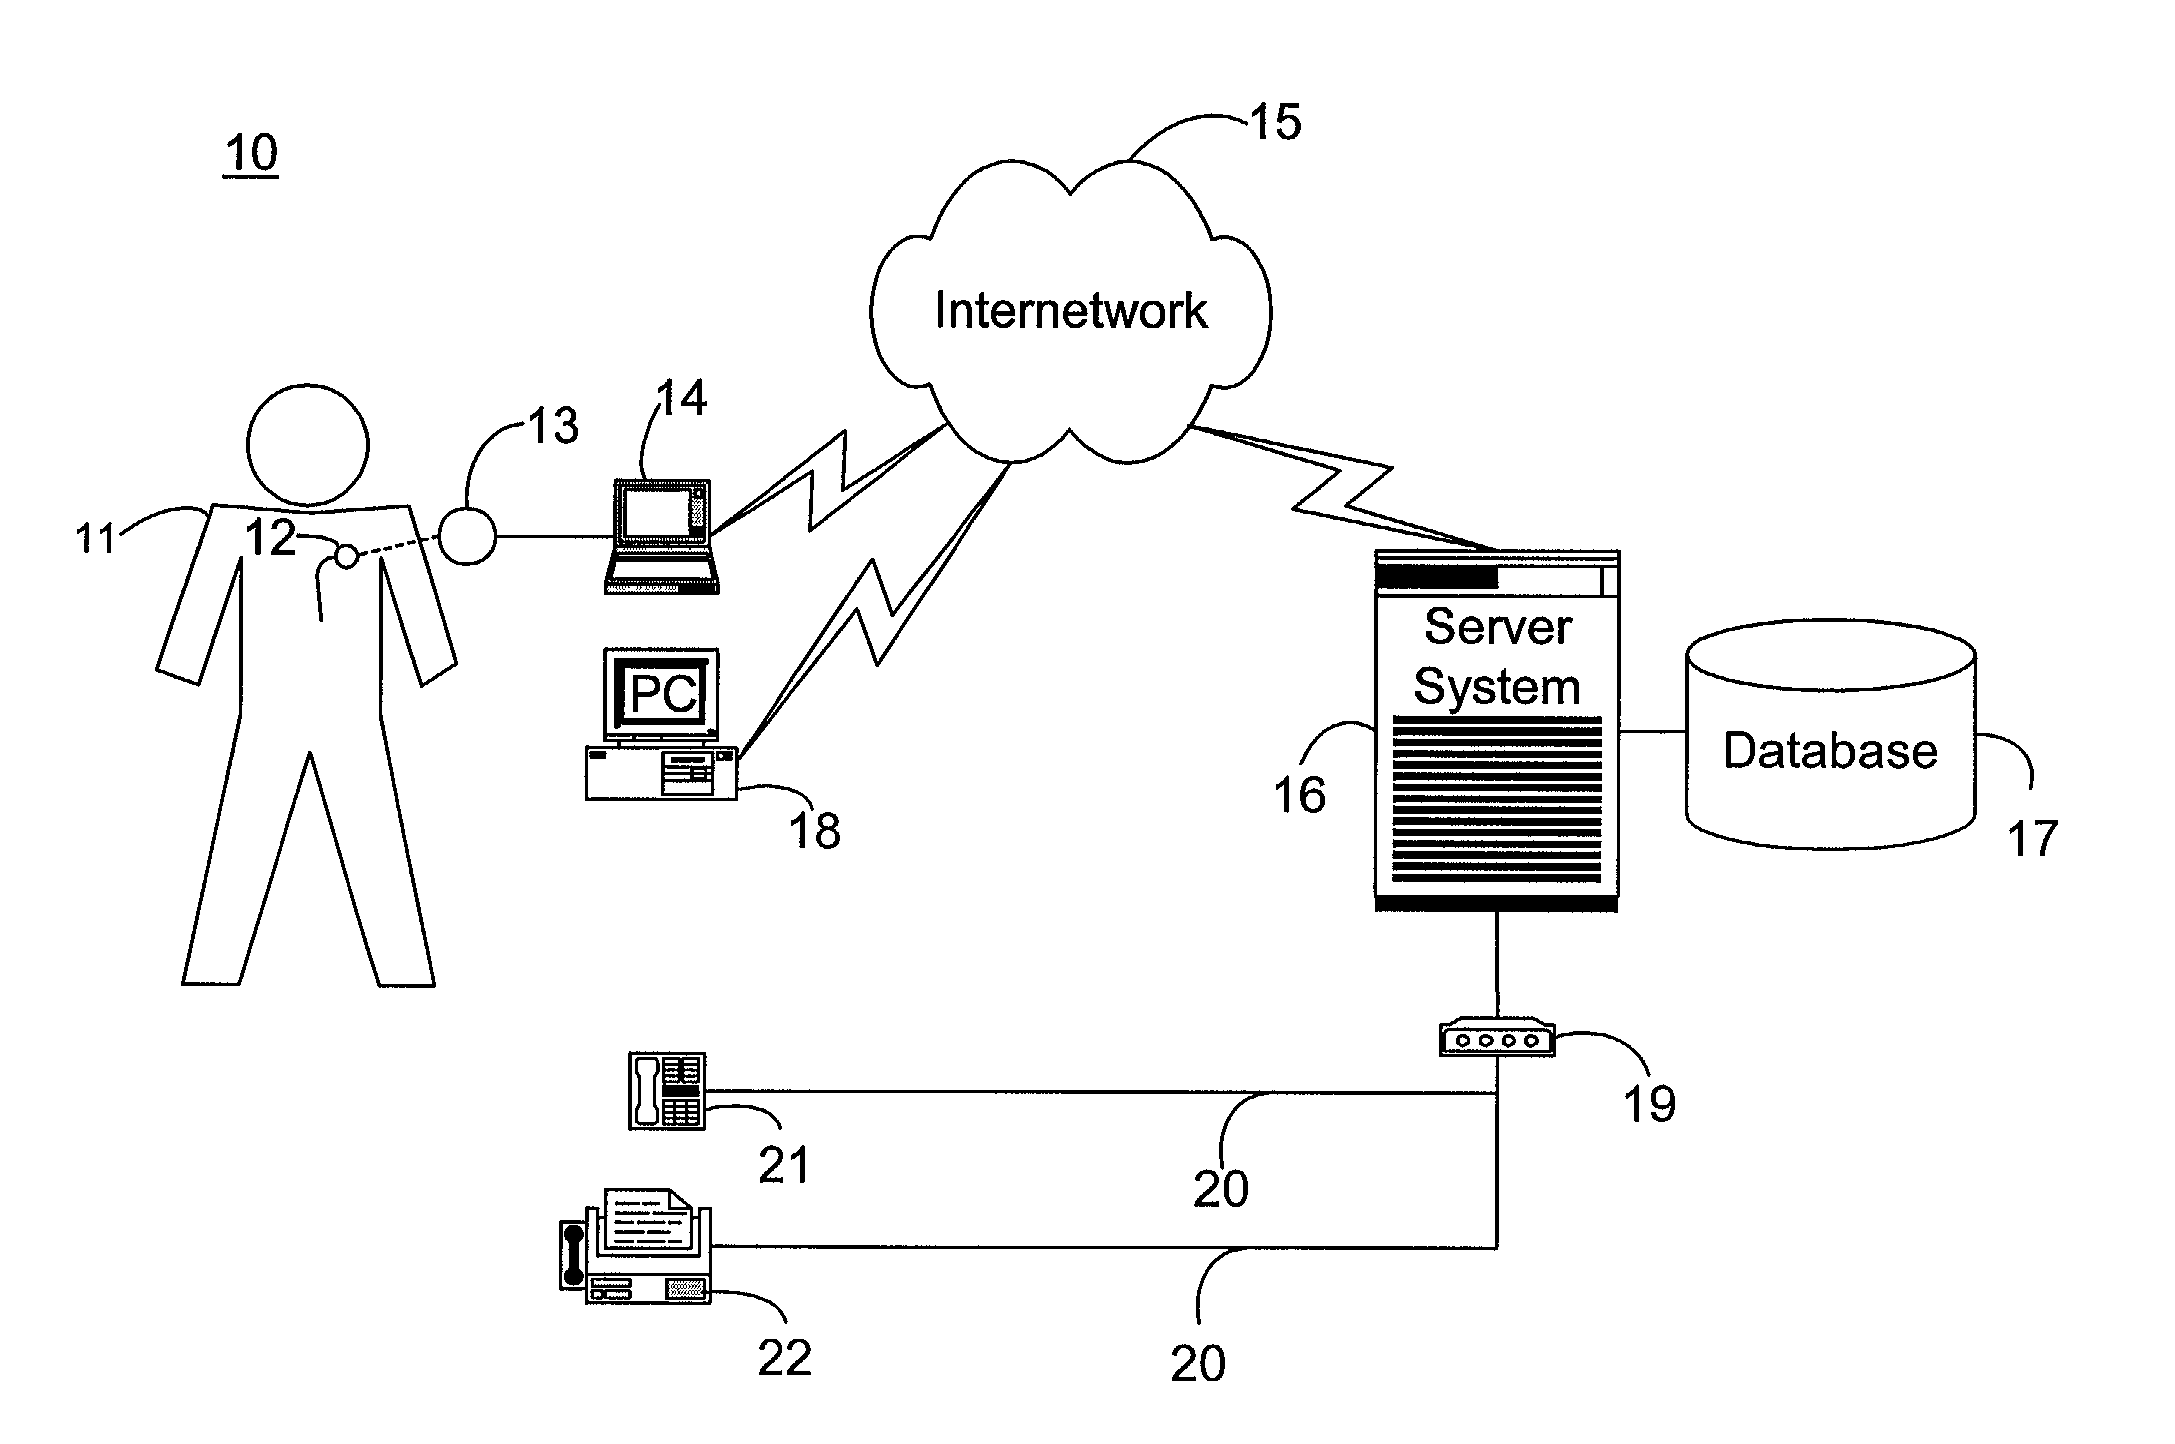 System and method for processing normalized voice feedback for use in automated patient care